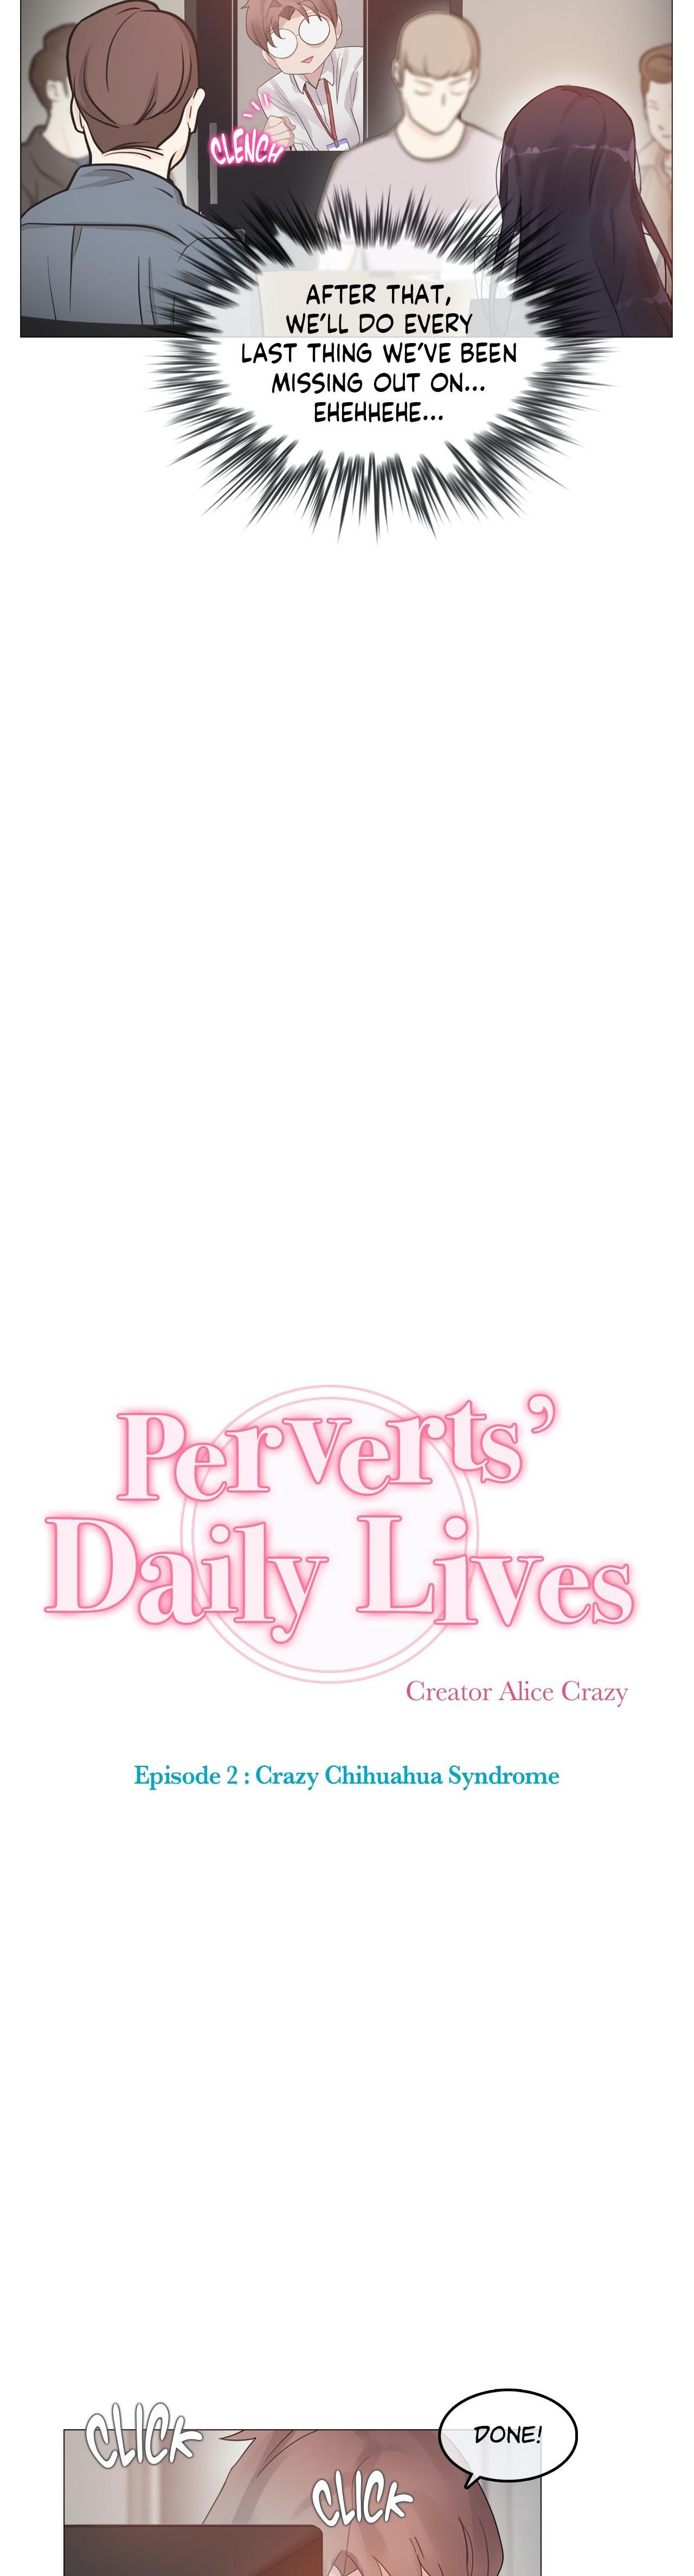 Perverts' Daily Lives Episode 2: Crazy Chihuahua Syndrome 337